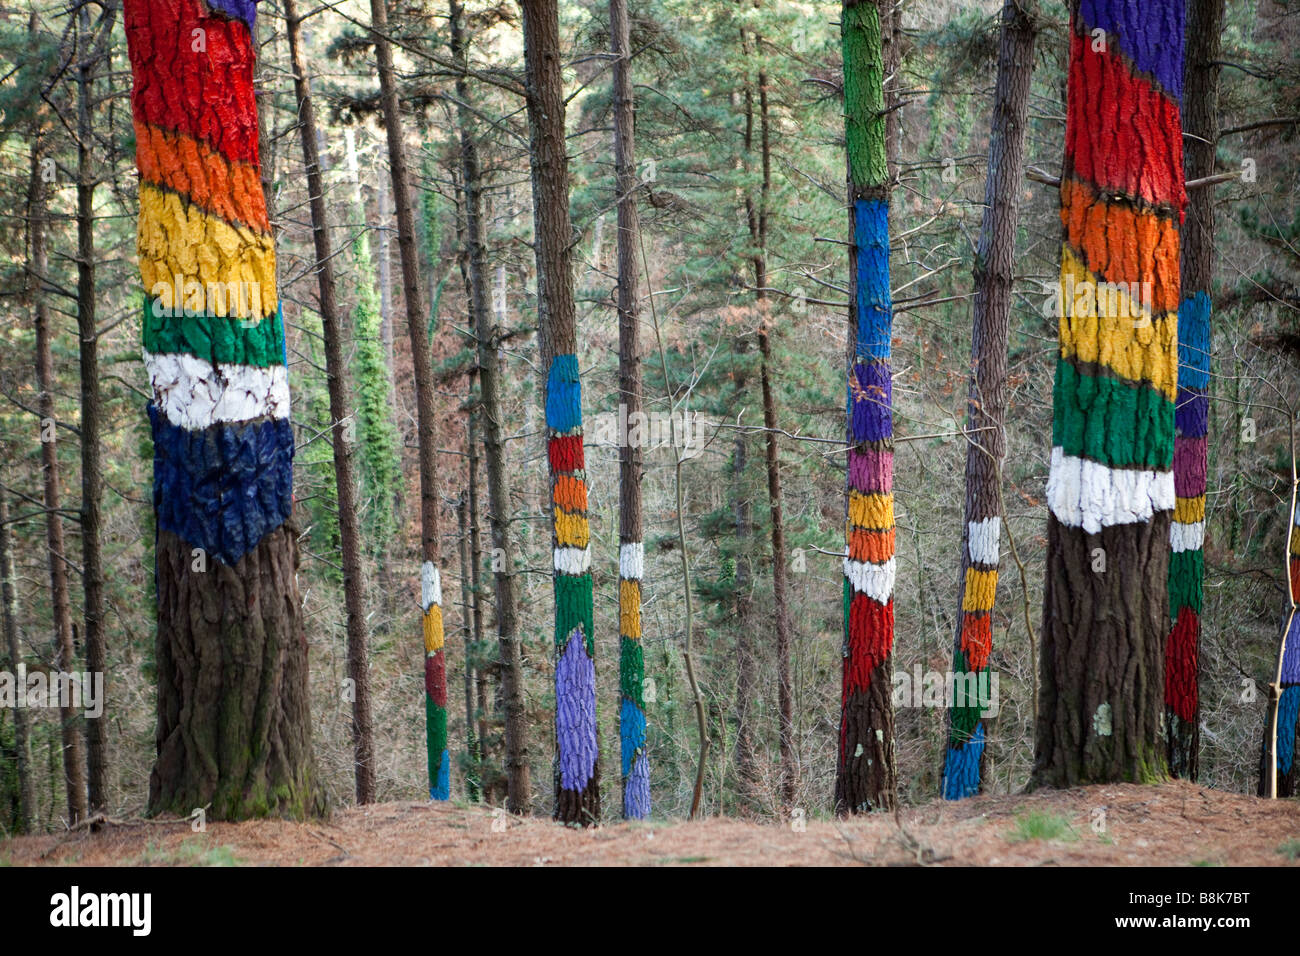 Bosque Pintado de Oma, 'the painted forest of Oma', where artist Agustin Ibarrola has painted eyes, people and geometric shapes. Stock Photo